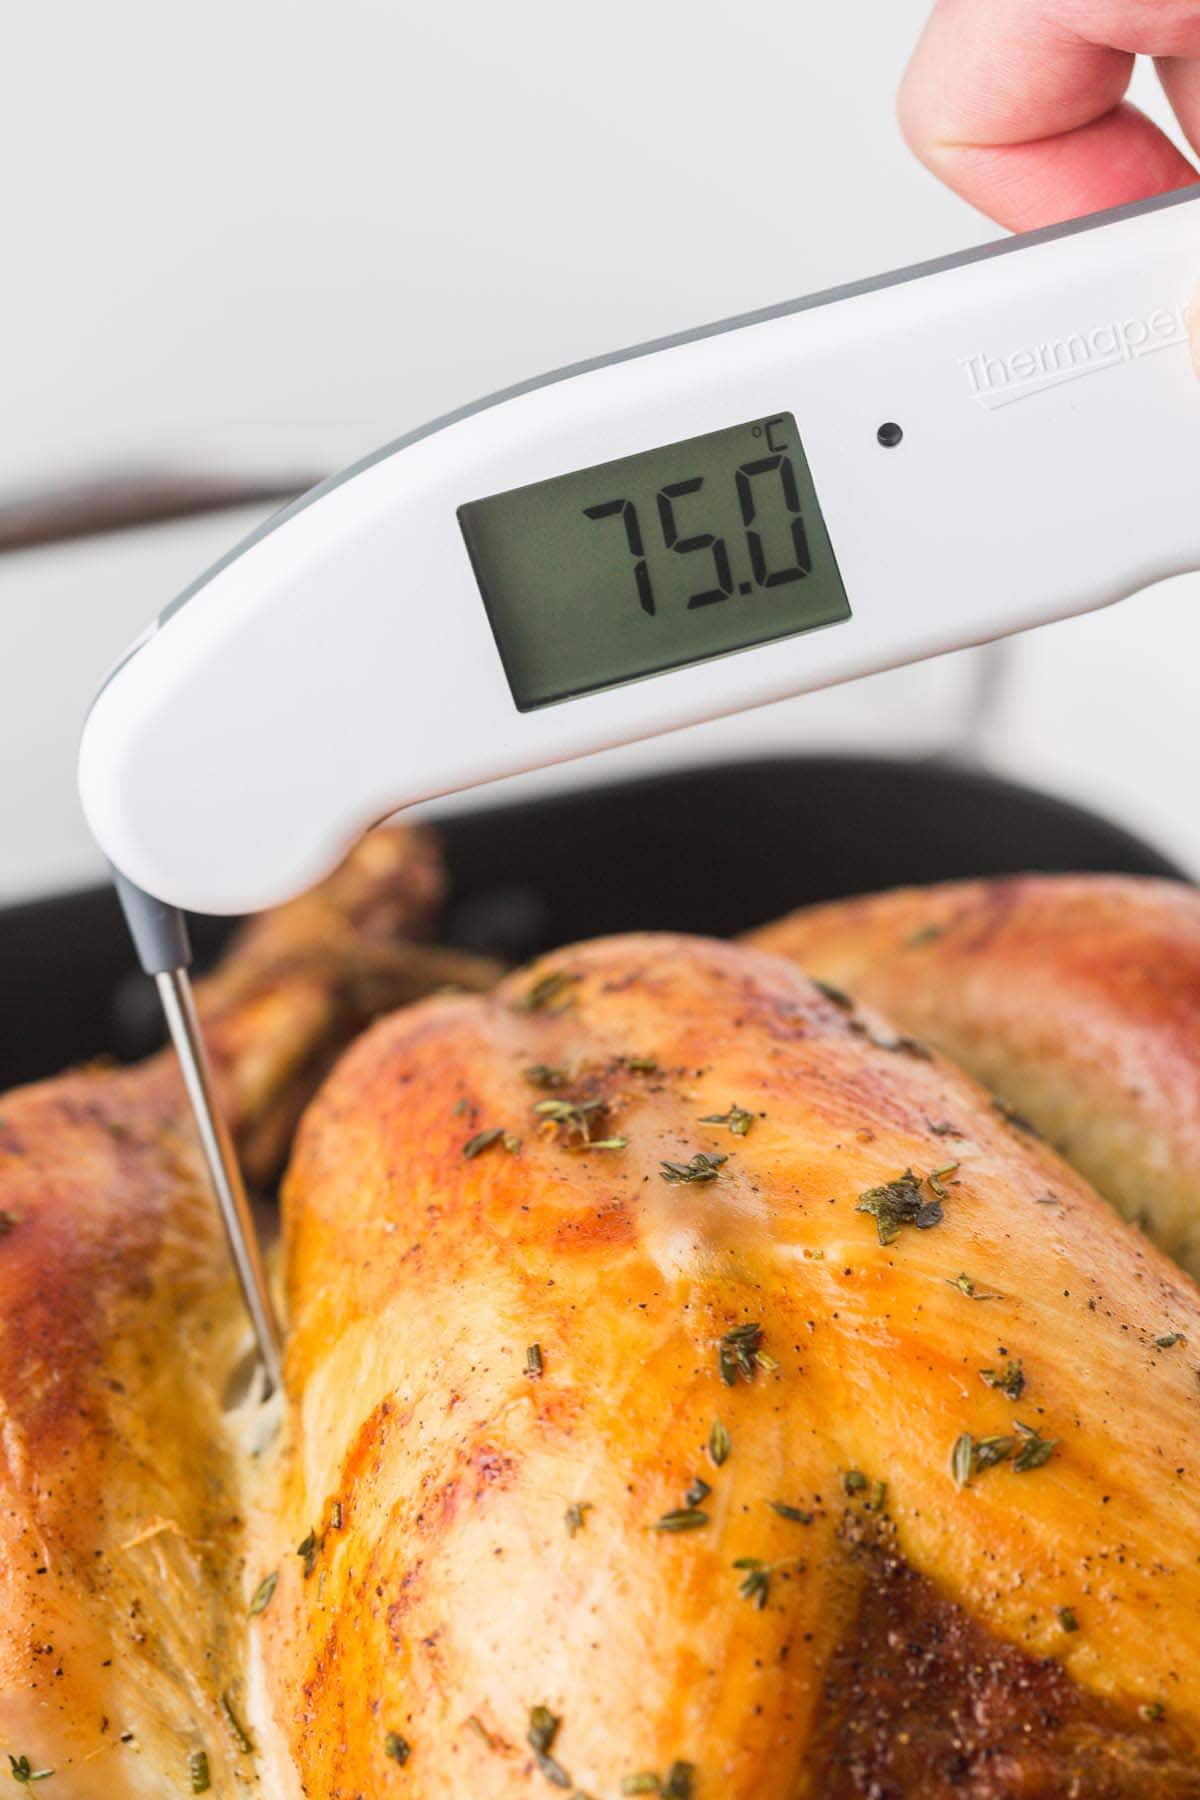 Checking the internal temperature of the turkey thigh using a Thermapen kitchen thermometer, registering 75°C